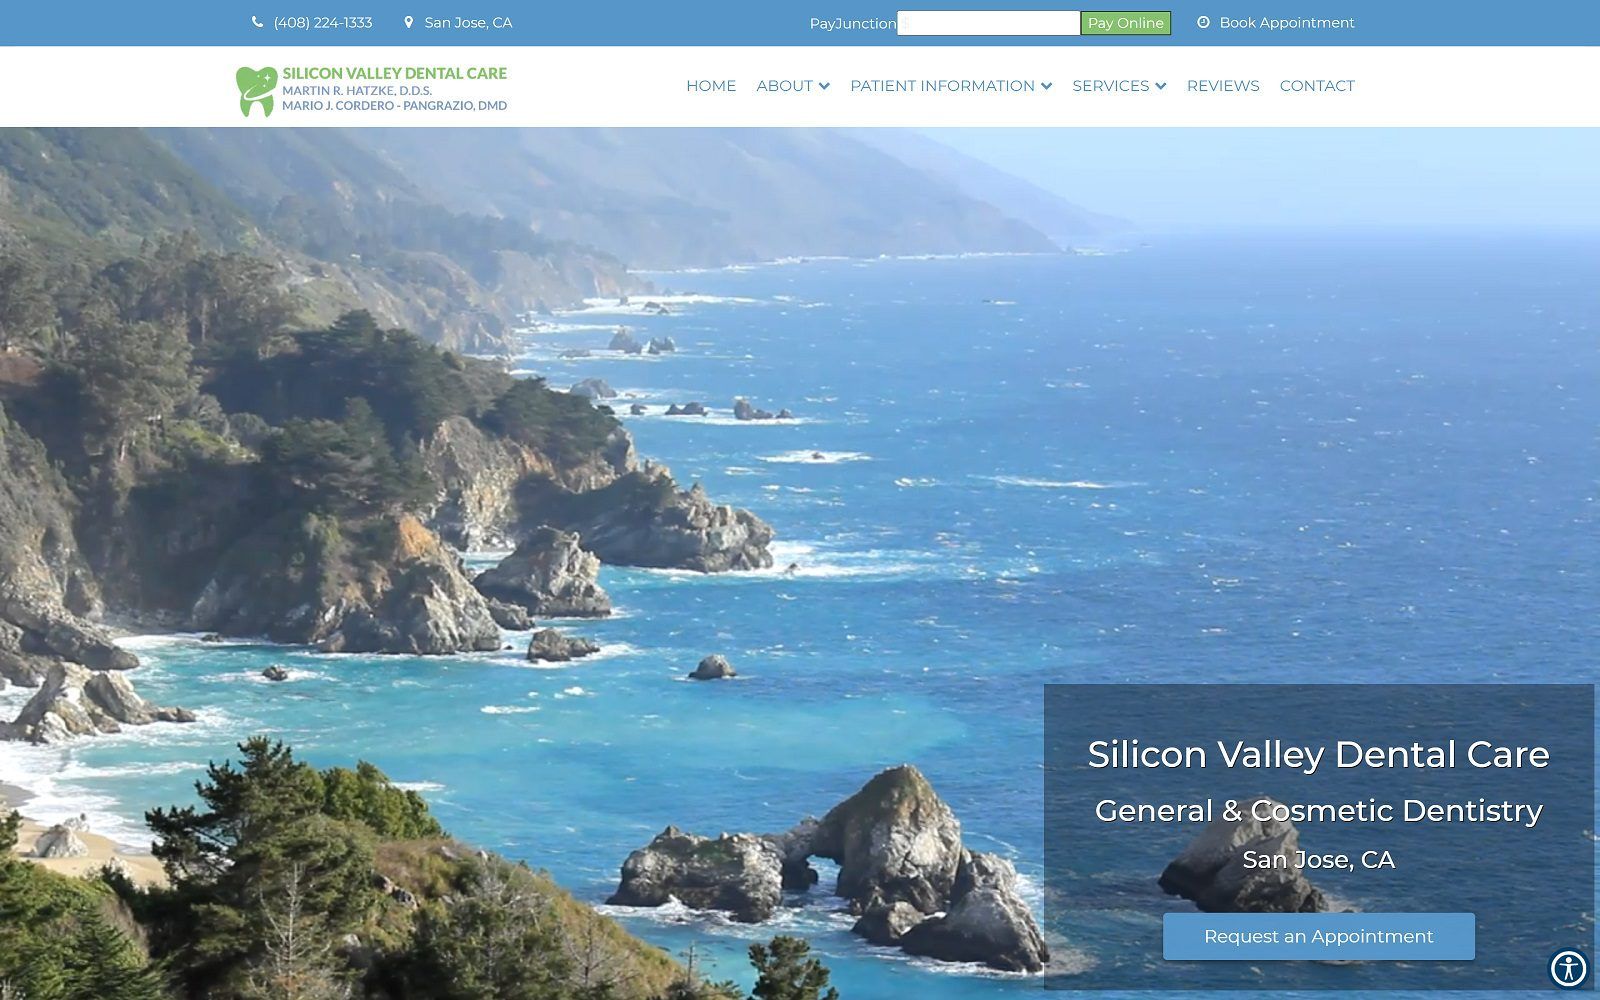 The screenshot of silicon valley dental care website